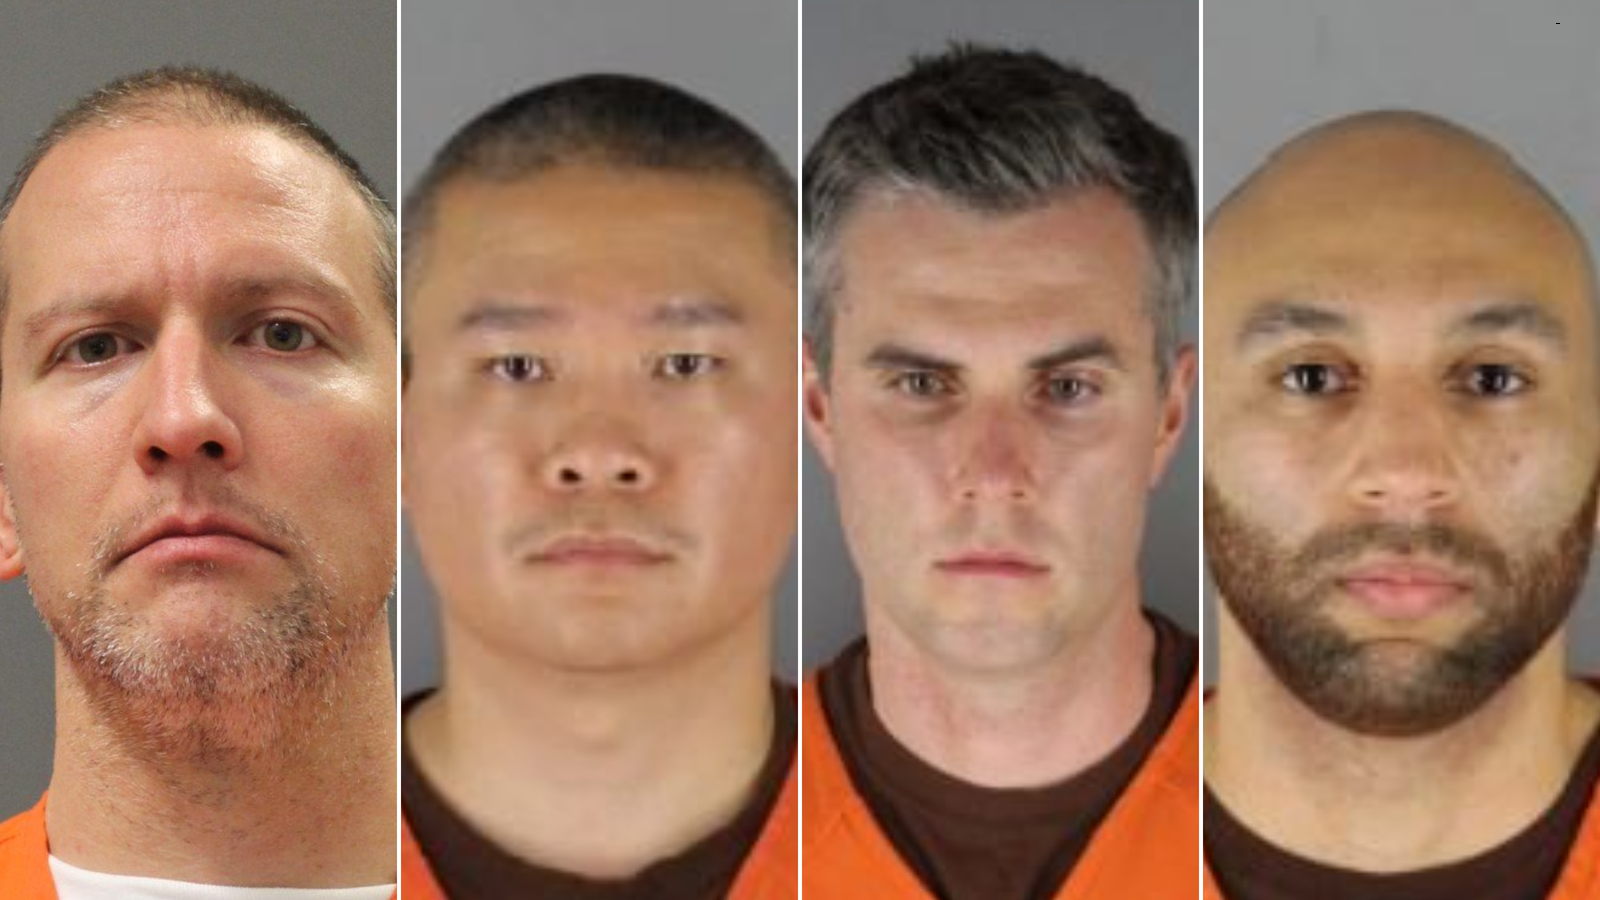 Former officers Tou Thao, Thomas Lane, and J. Alexander Kueng face state charges of aiding and abetting Floyd’s murder.